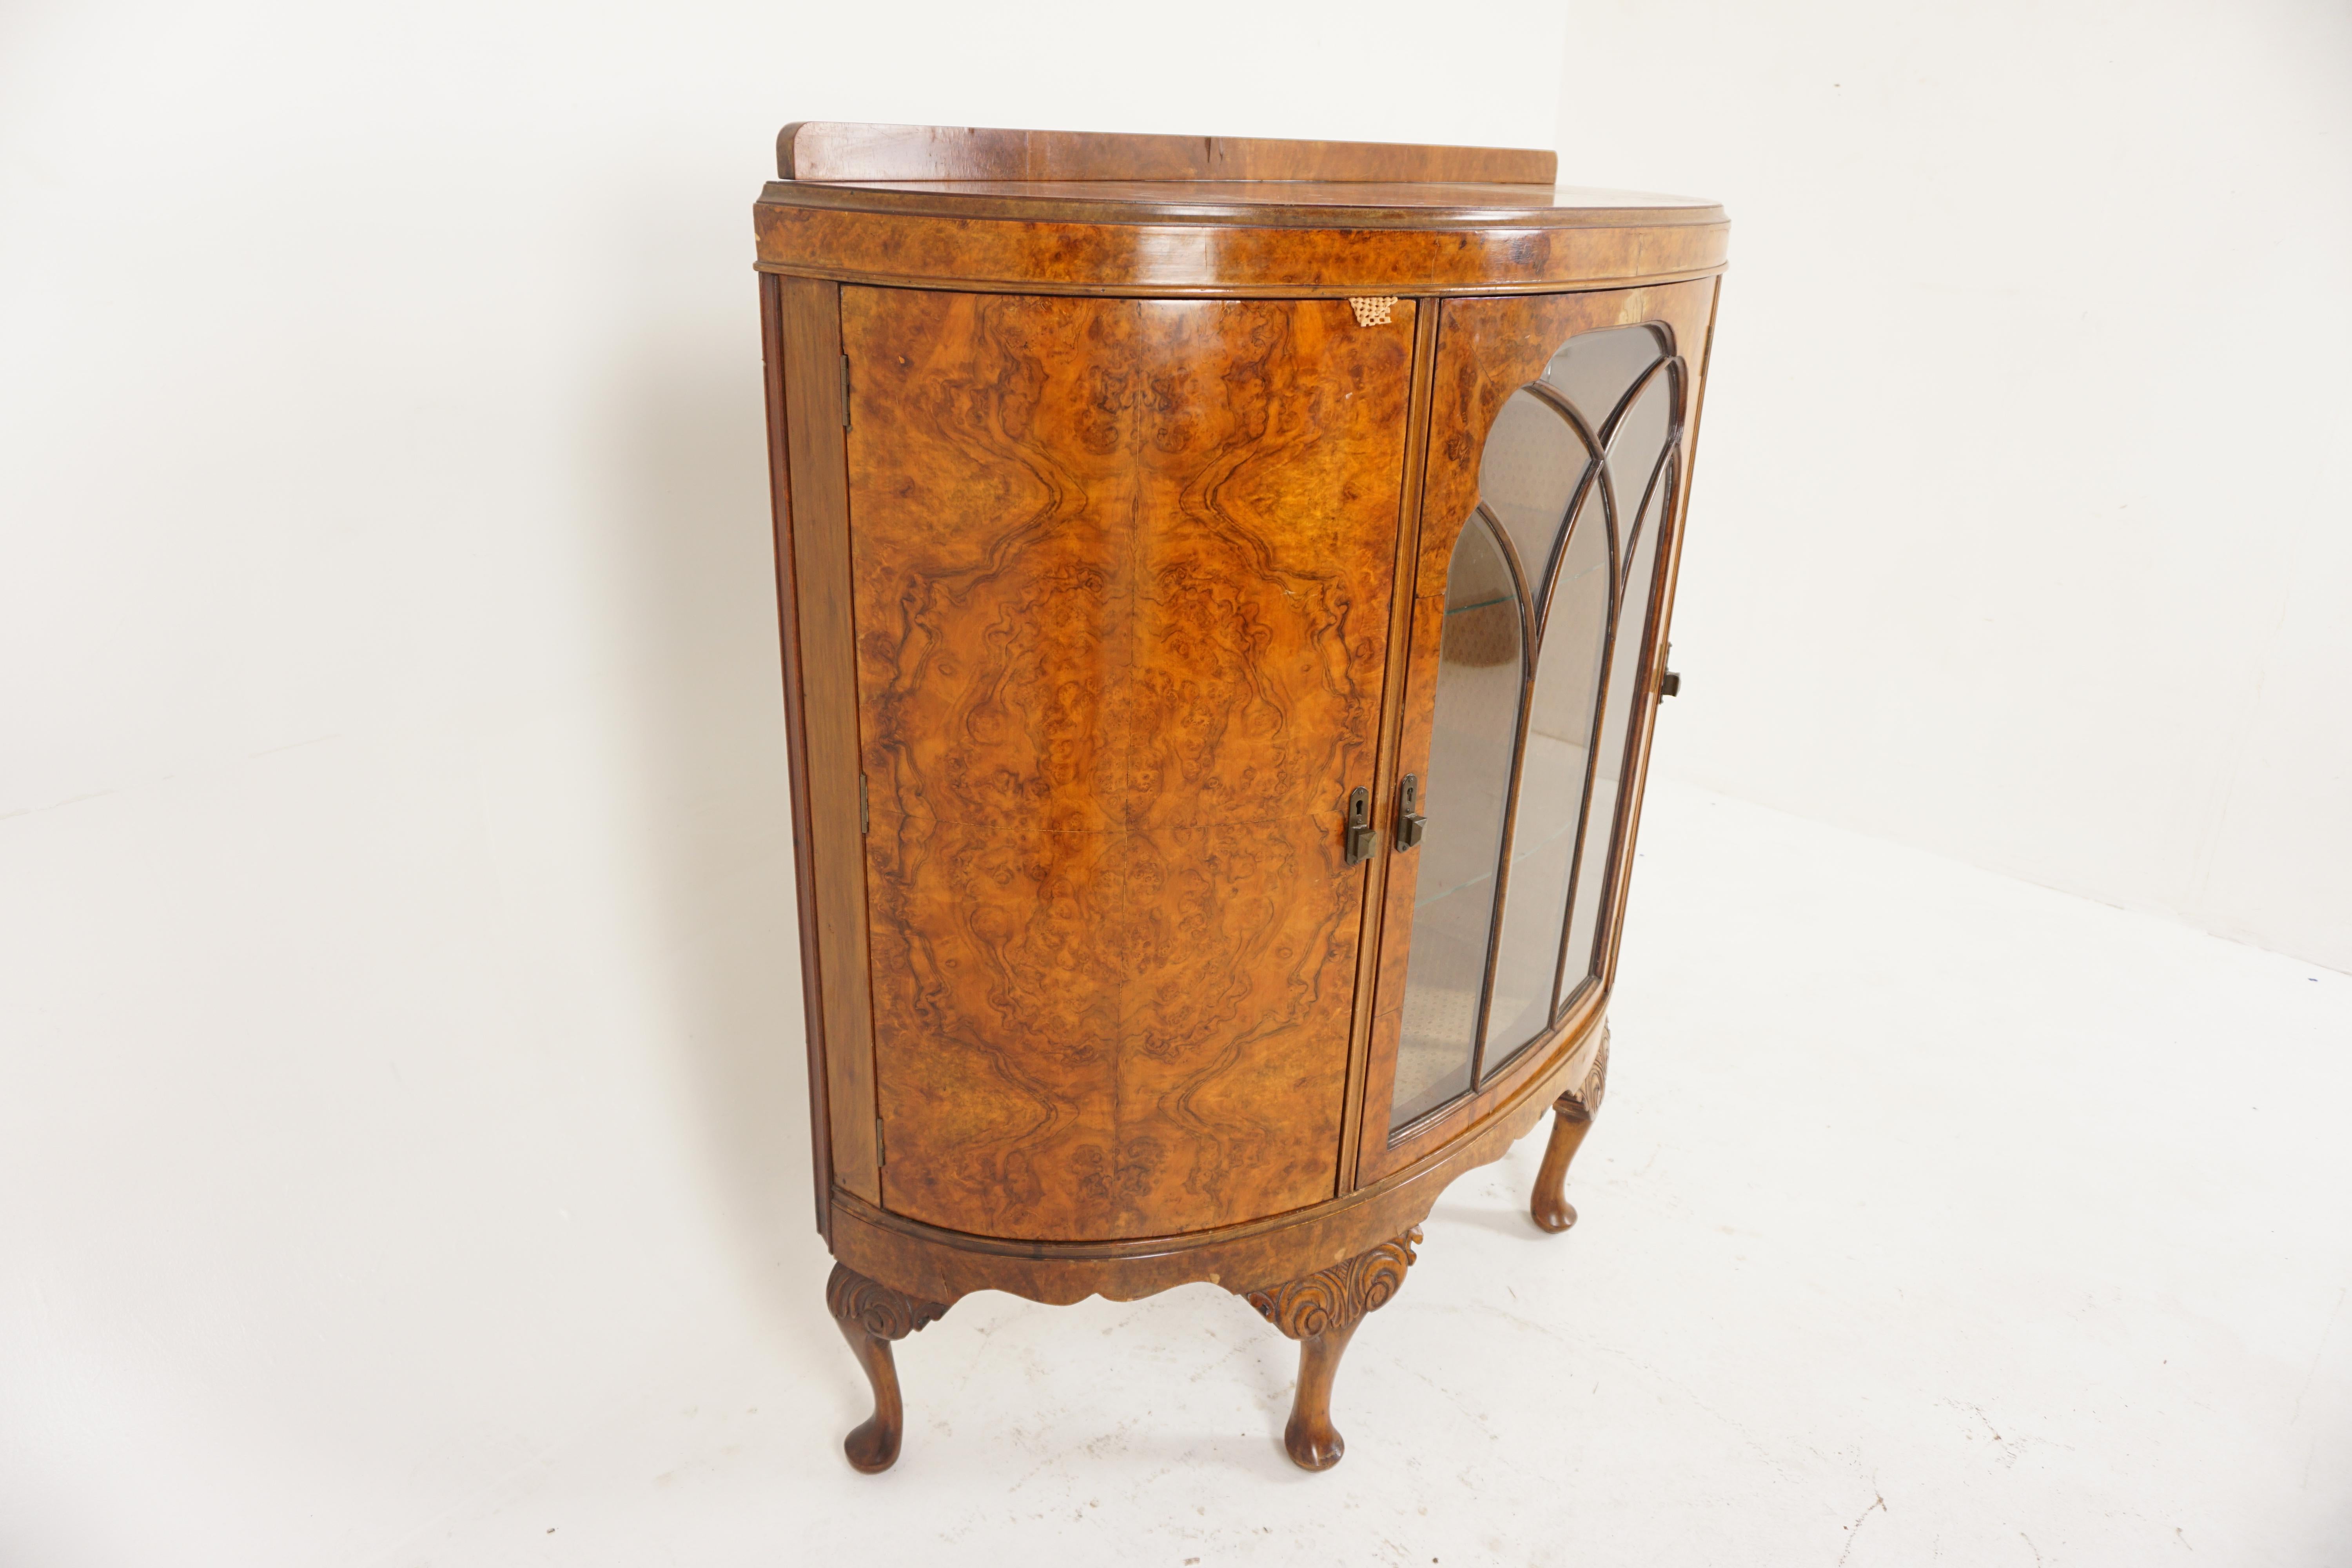 antique china cabinet 1920s